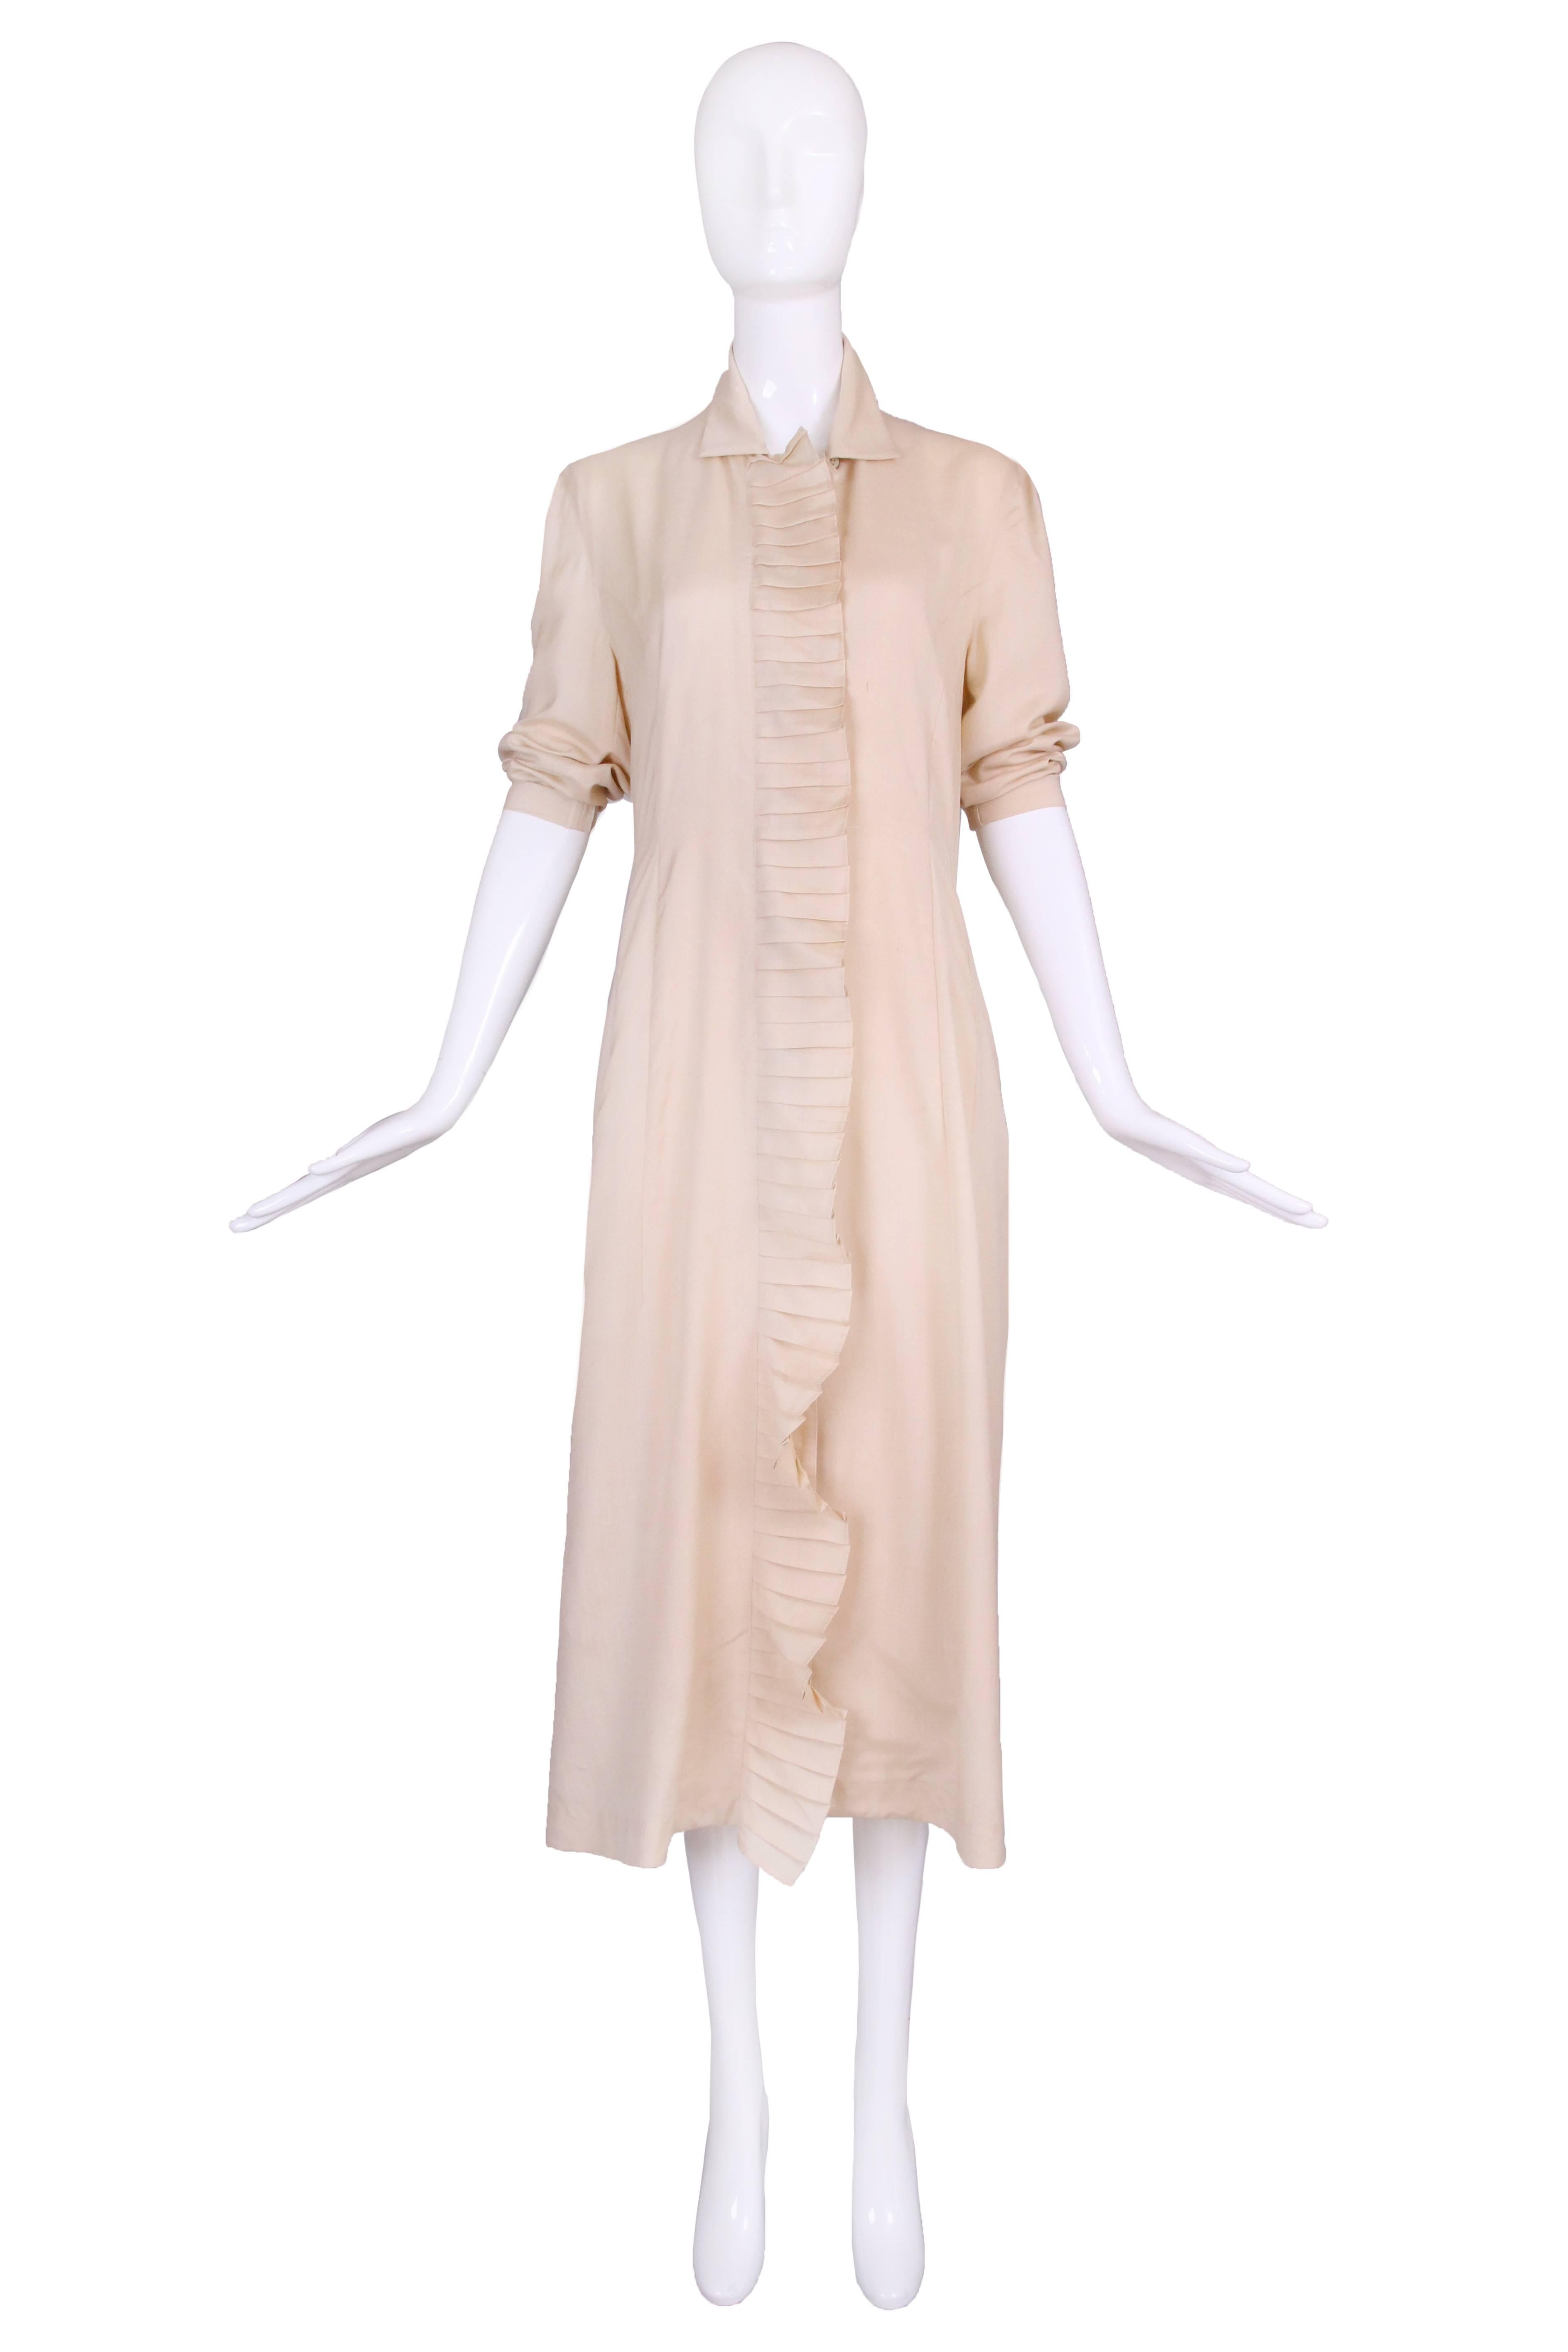 Matsuda creme colored silk and wool blend overcoat/dress coat with oversized button closure at the front and geometric ruffled trim that continues at the bottom hem, round to the back and forming an opening at center back hem. In excellent condition